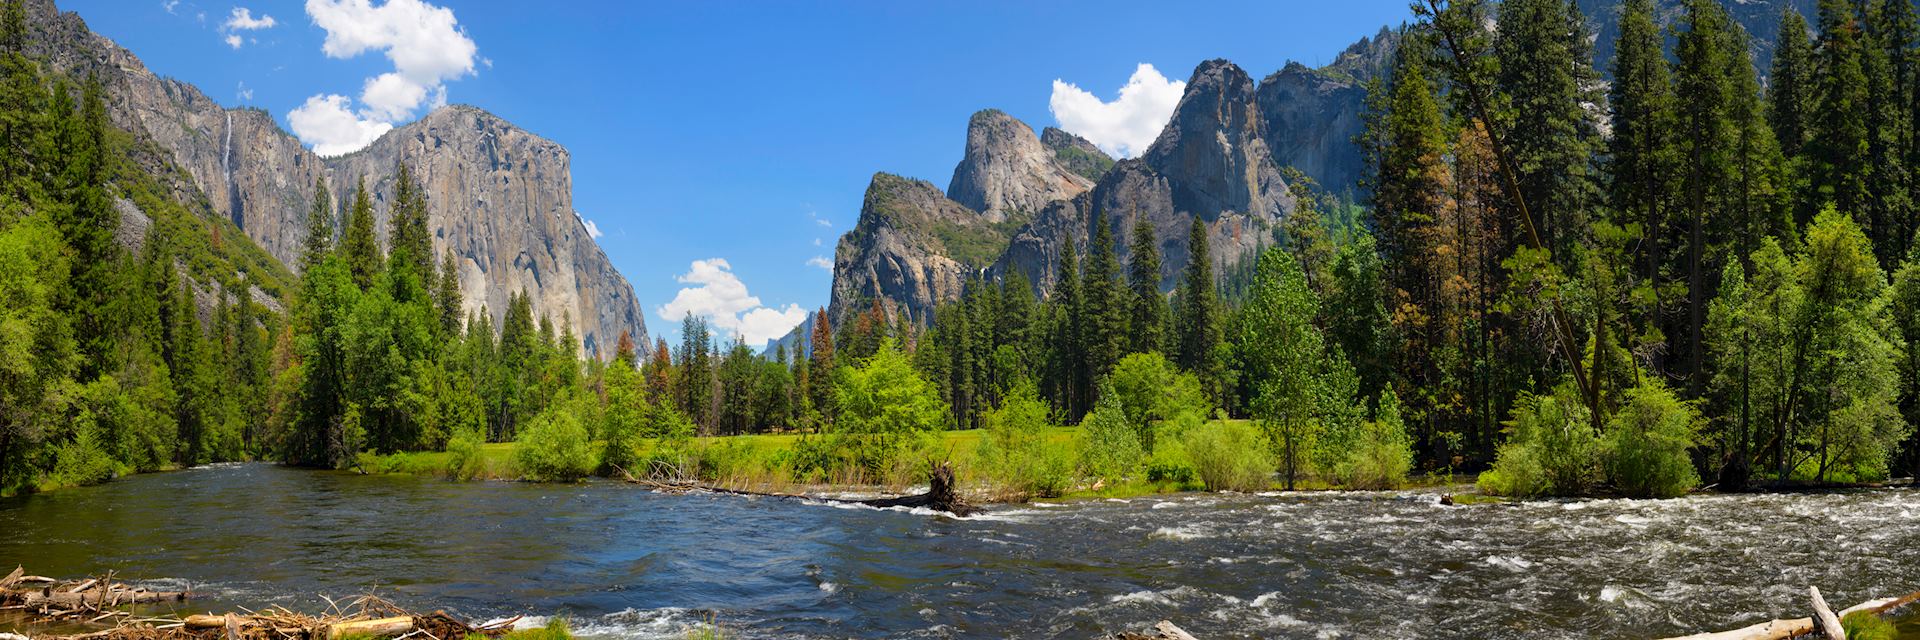 What To Do In Yosemite National Park Our Highlights Guide